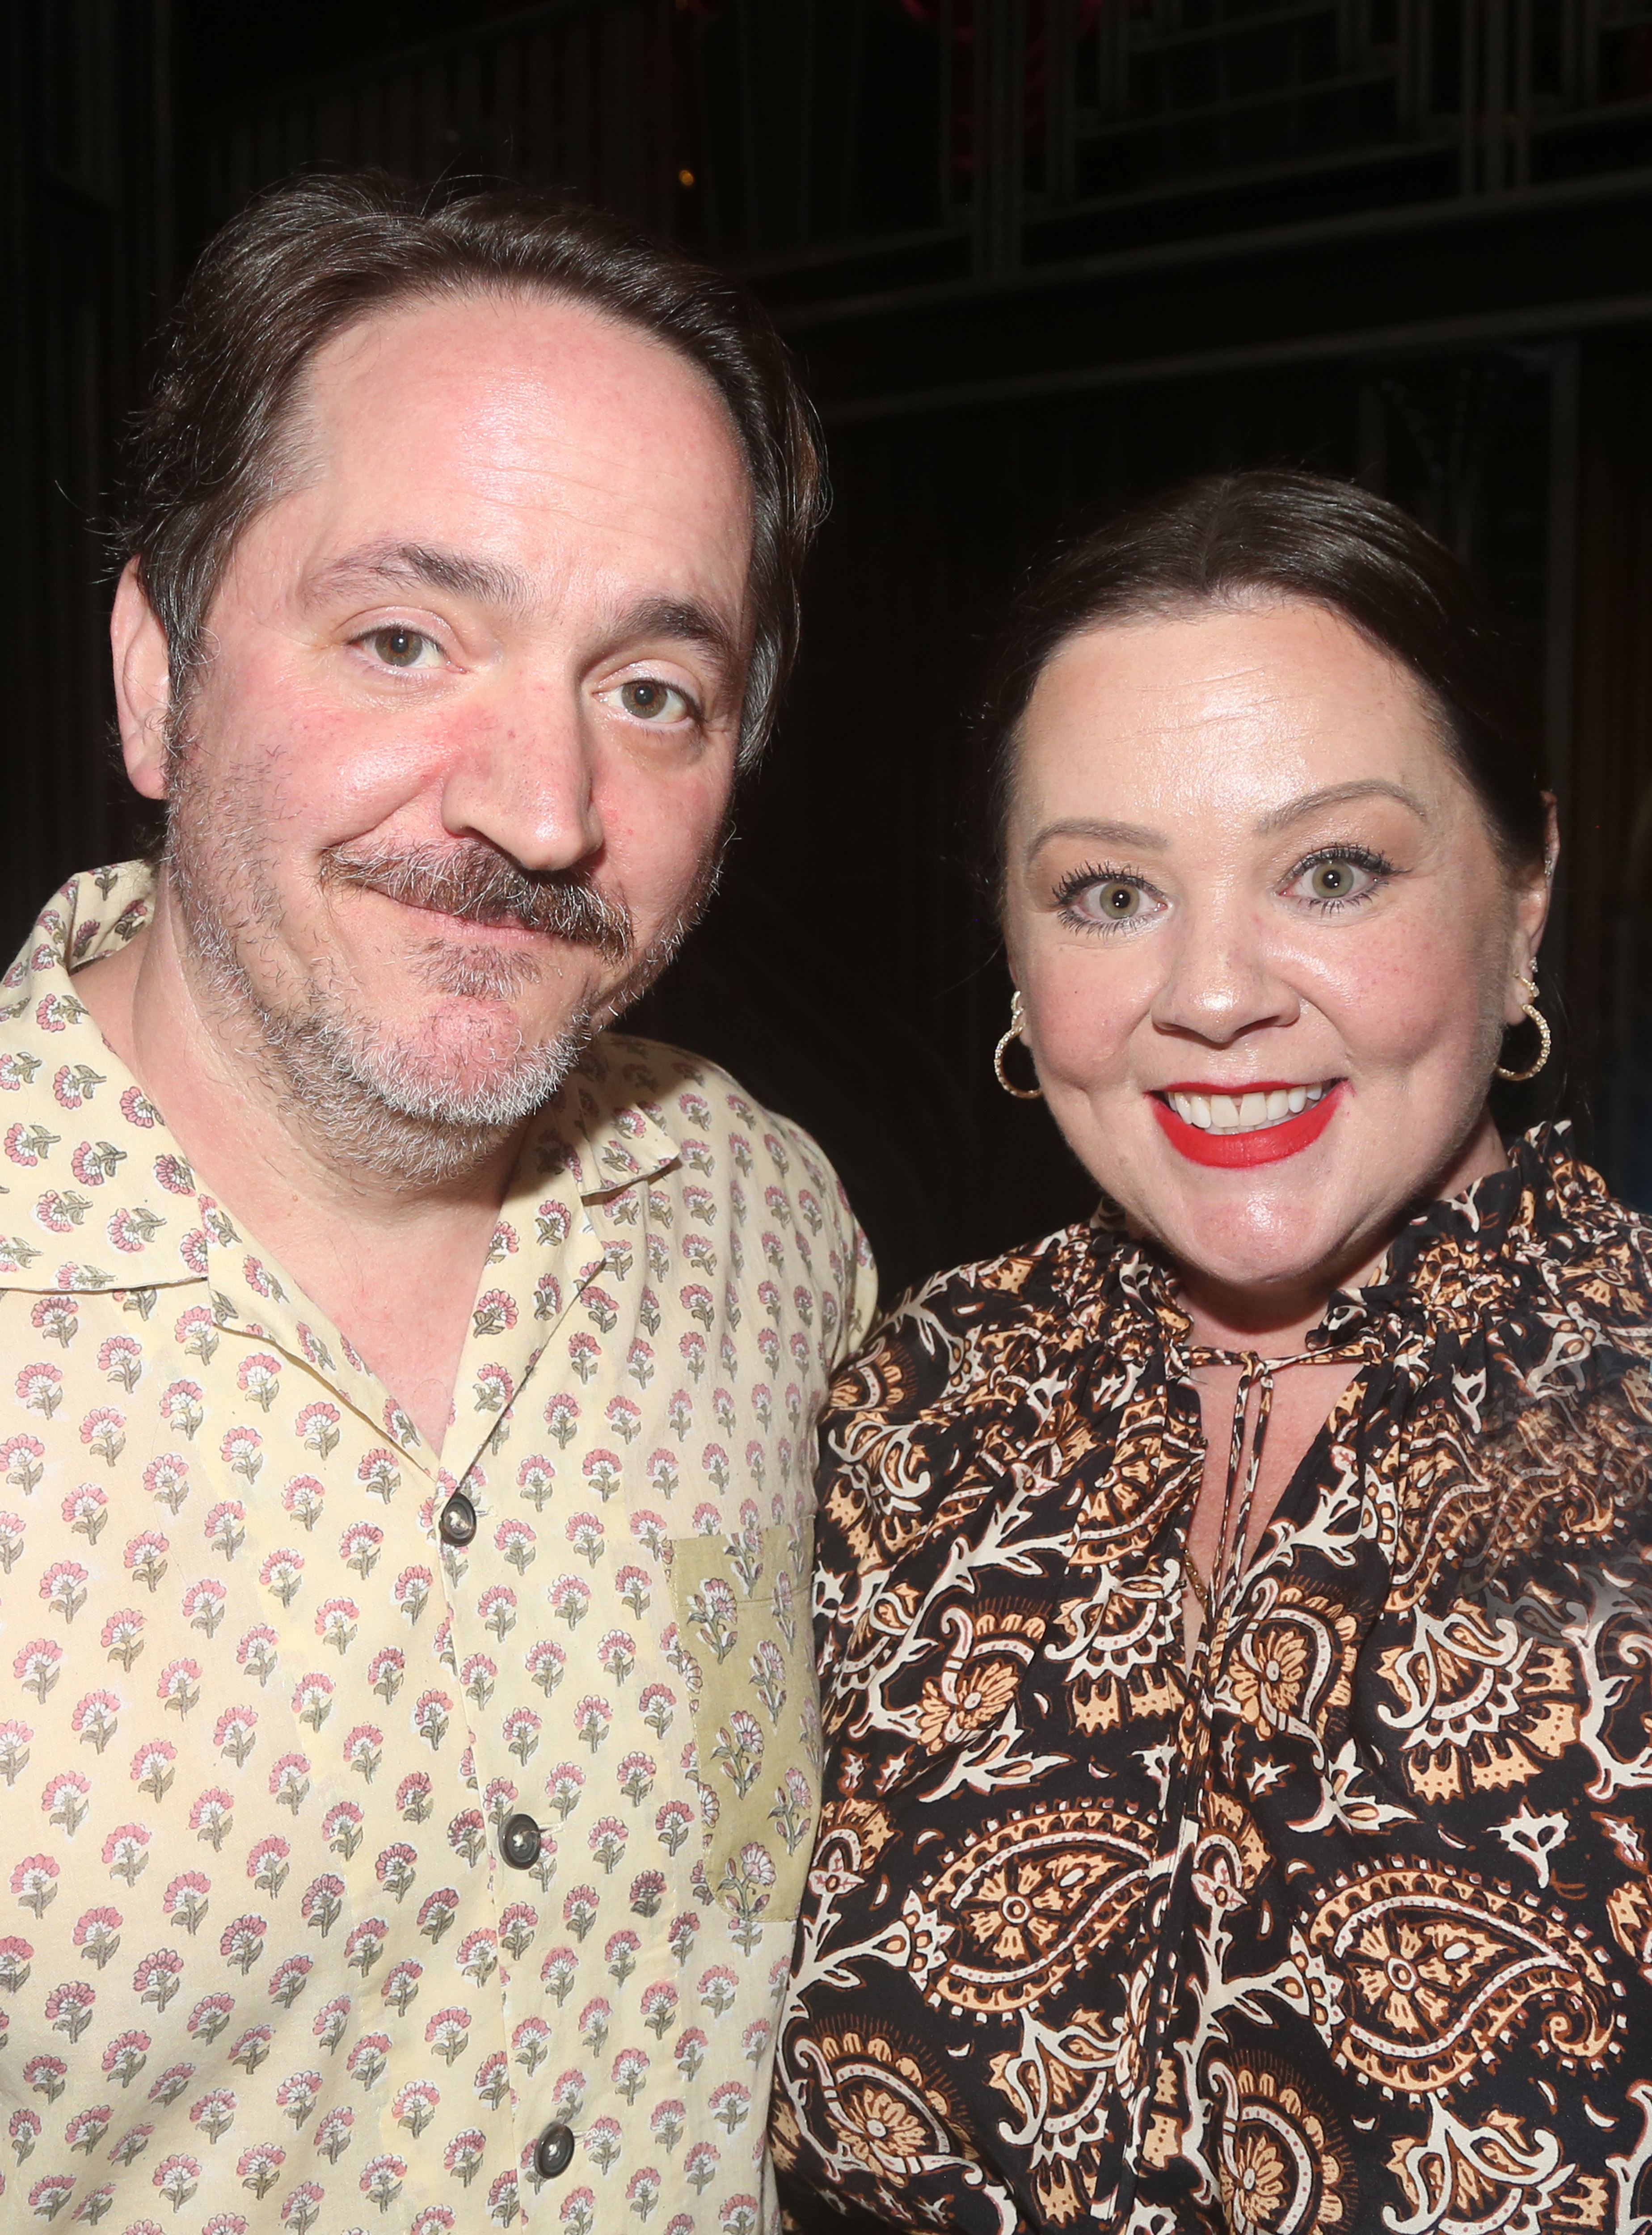 Ben Falcone and Melissa McCarthy at the Broadway performance of "Some Like it Hot!" in New York City on July 9, 2023 | Source: Getty Images